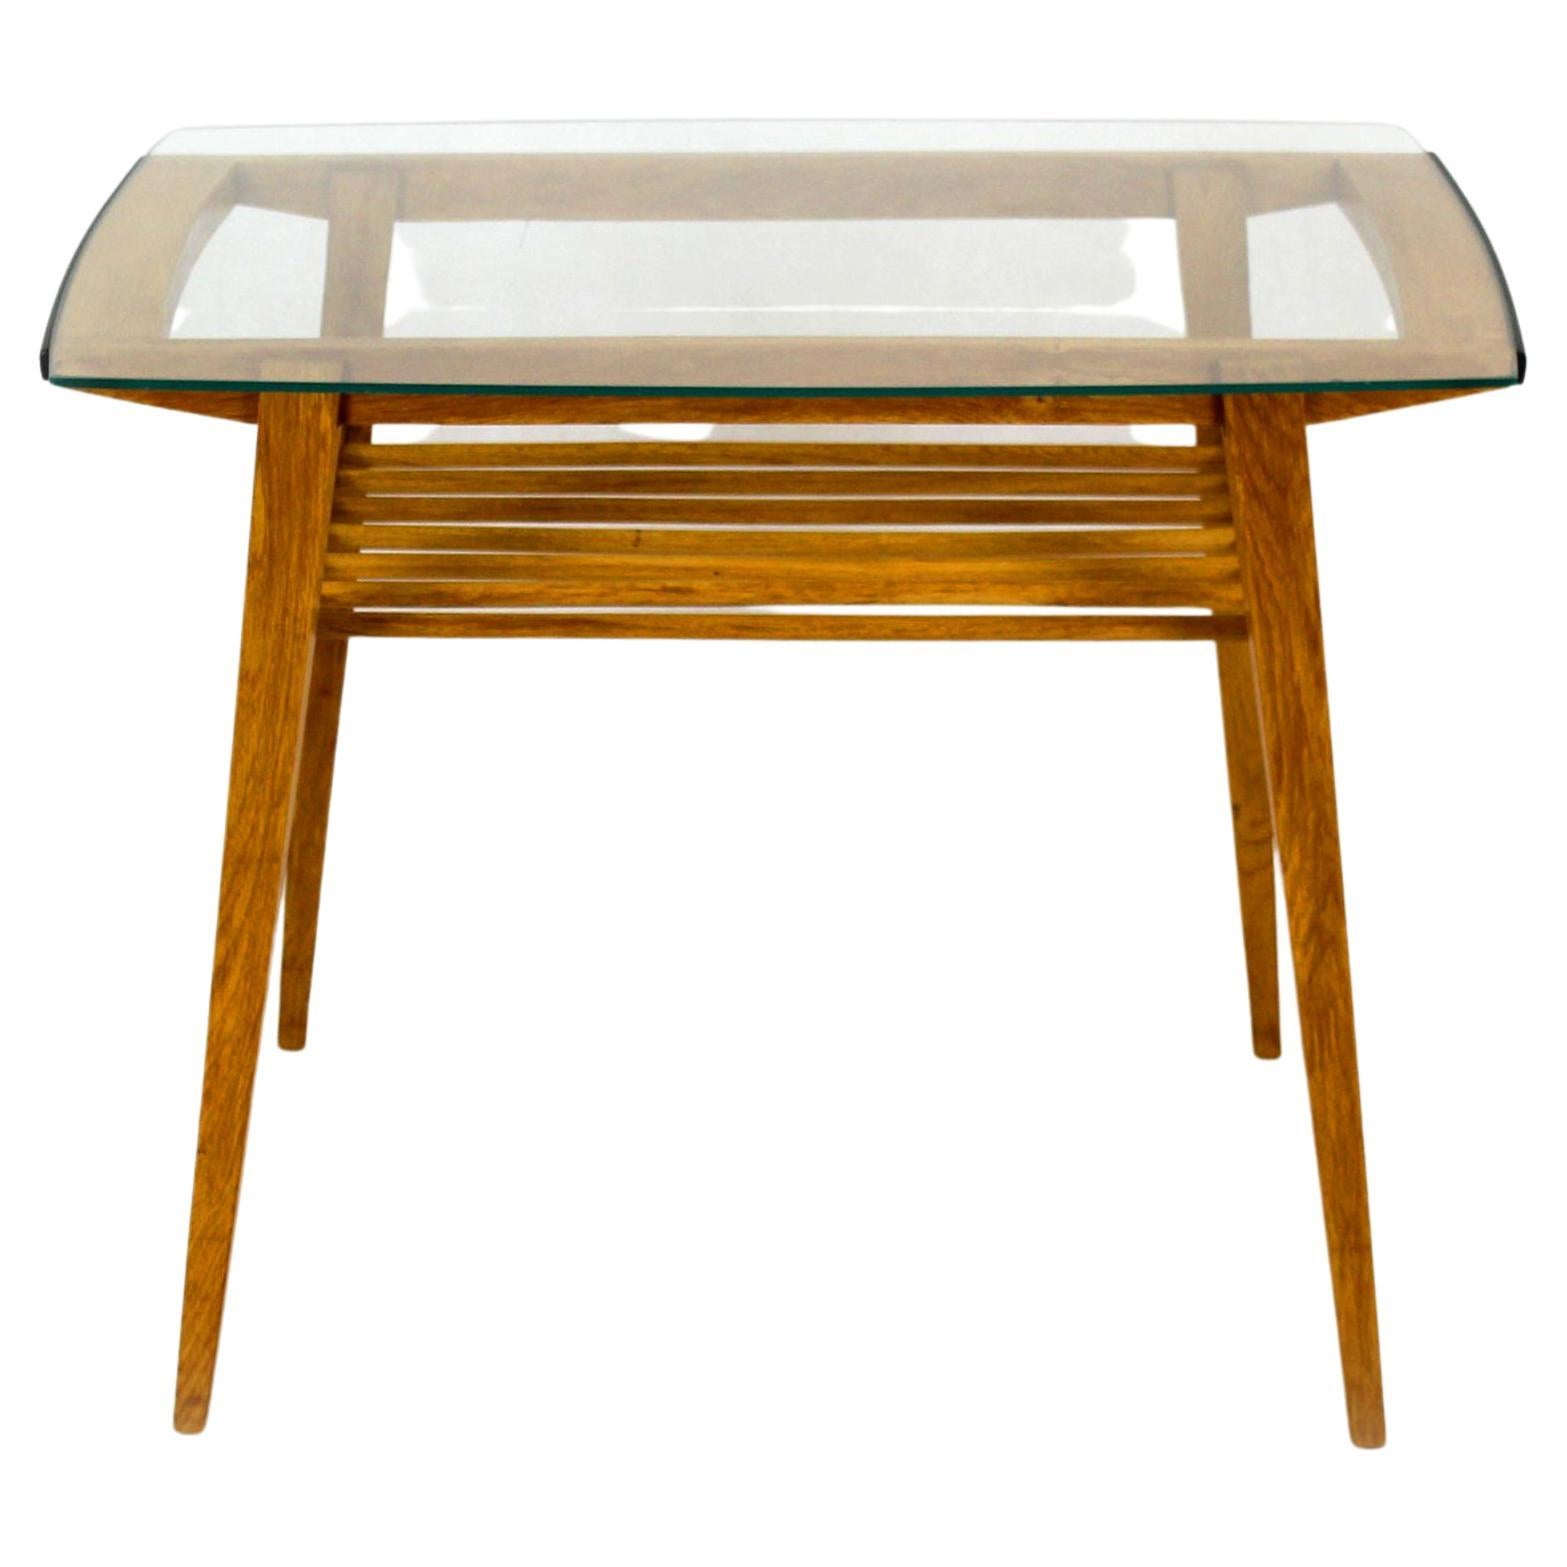 Restored Wooden Coffee Table with Glass Top from Druzstvo, 1960s